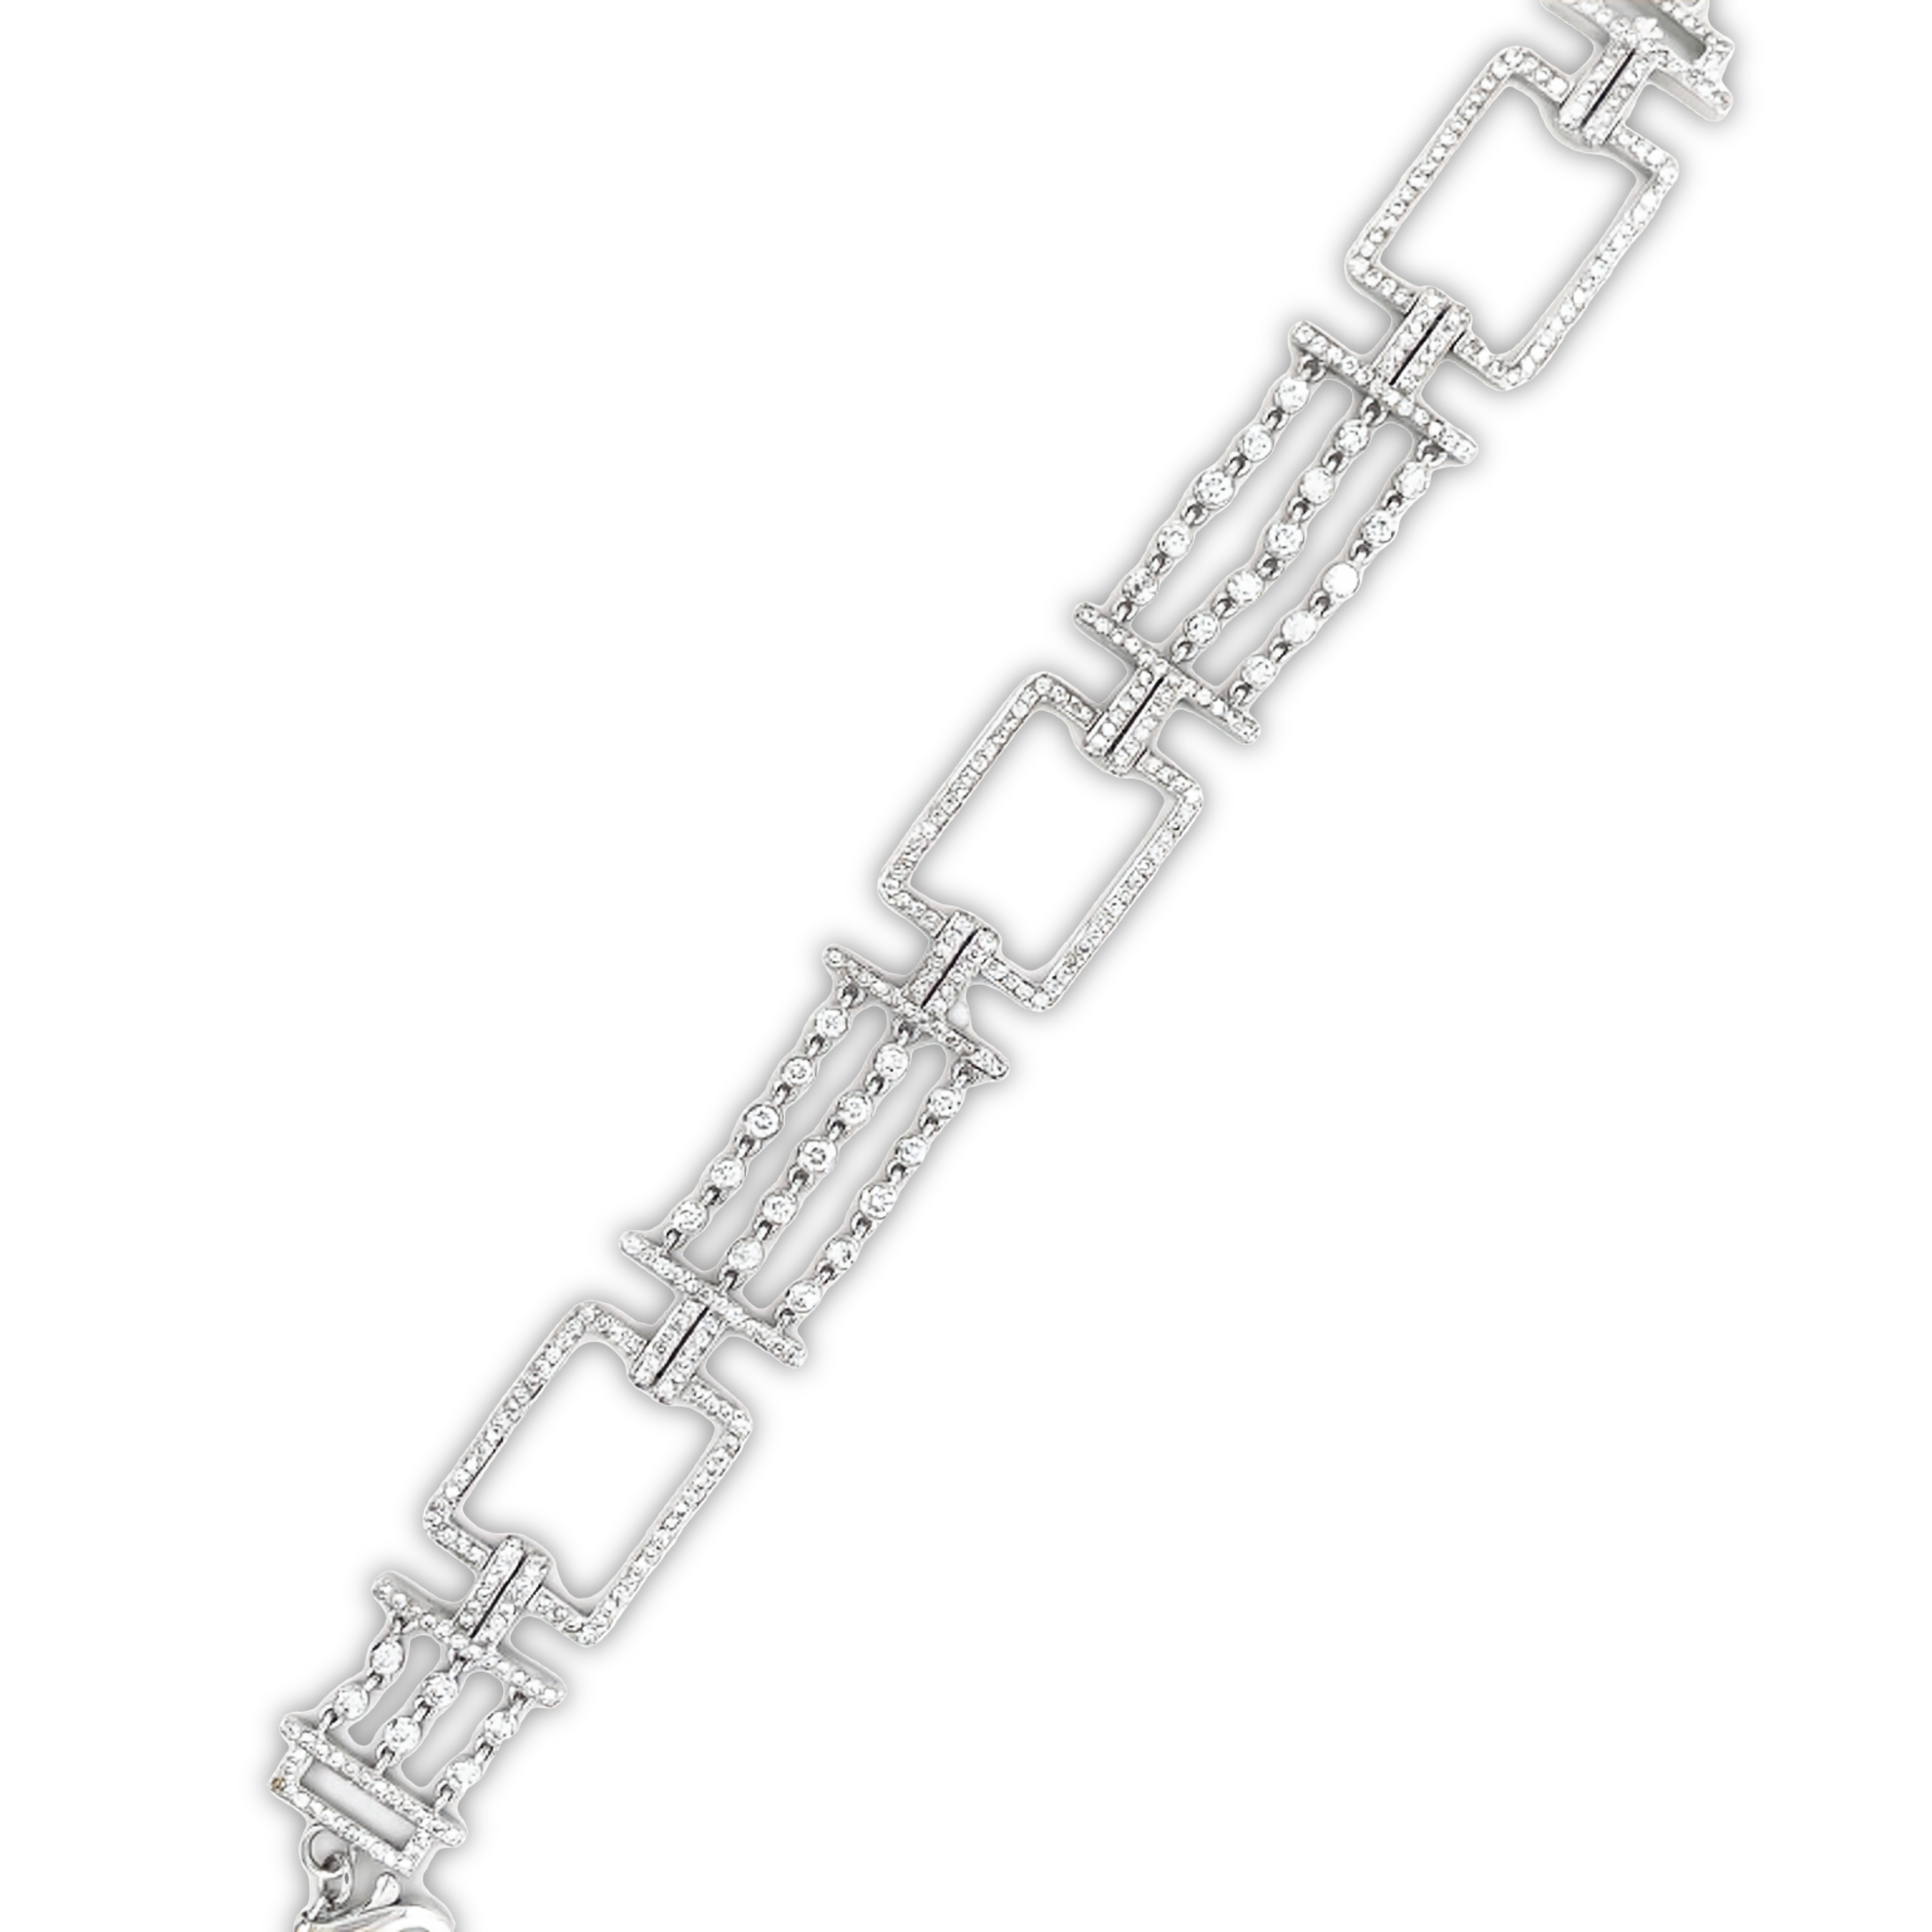 This 18K white gold bracelet features premium diamonds 2.32 cts in E/F quality, with a 0.5" width. It is 8" in length and includes a 1.5" sizing loop, secured with a lobster catch. An exquisite piece worthy of admiration.